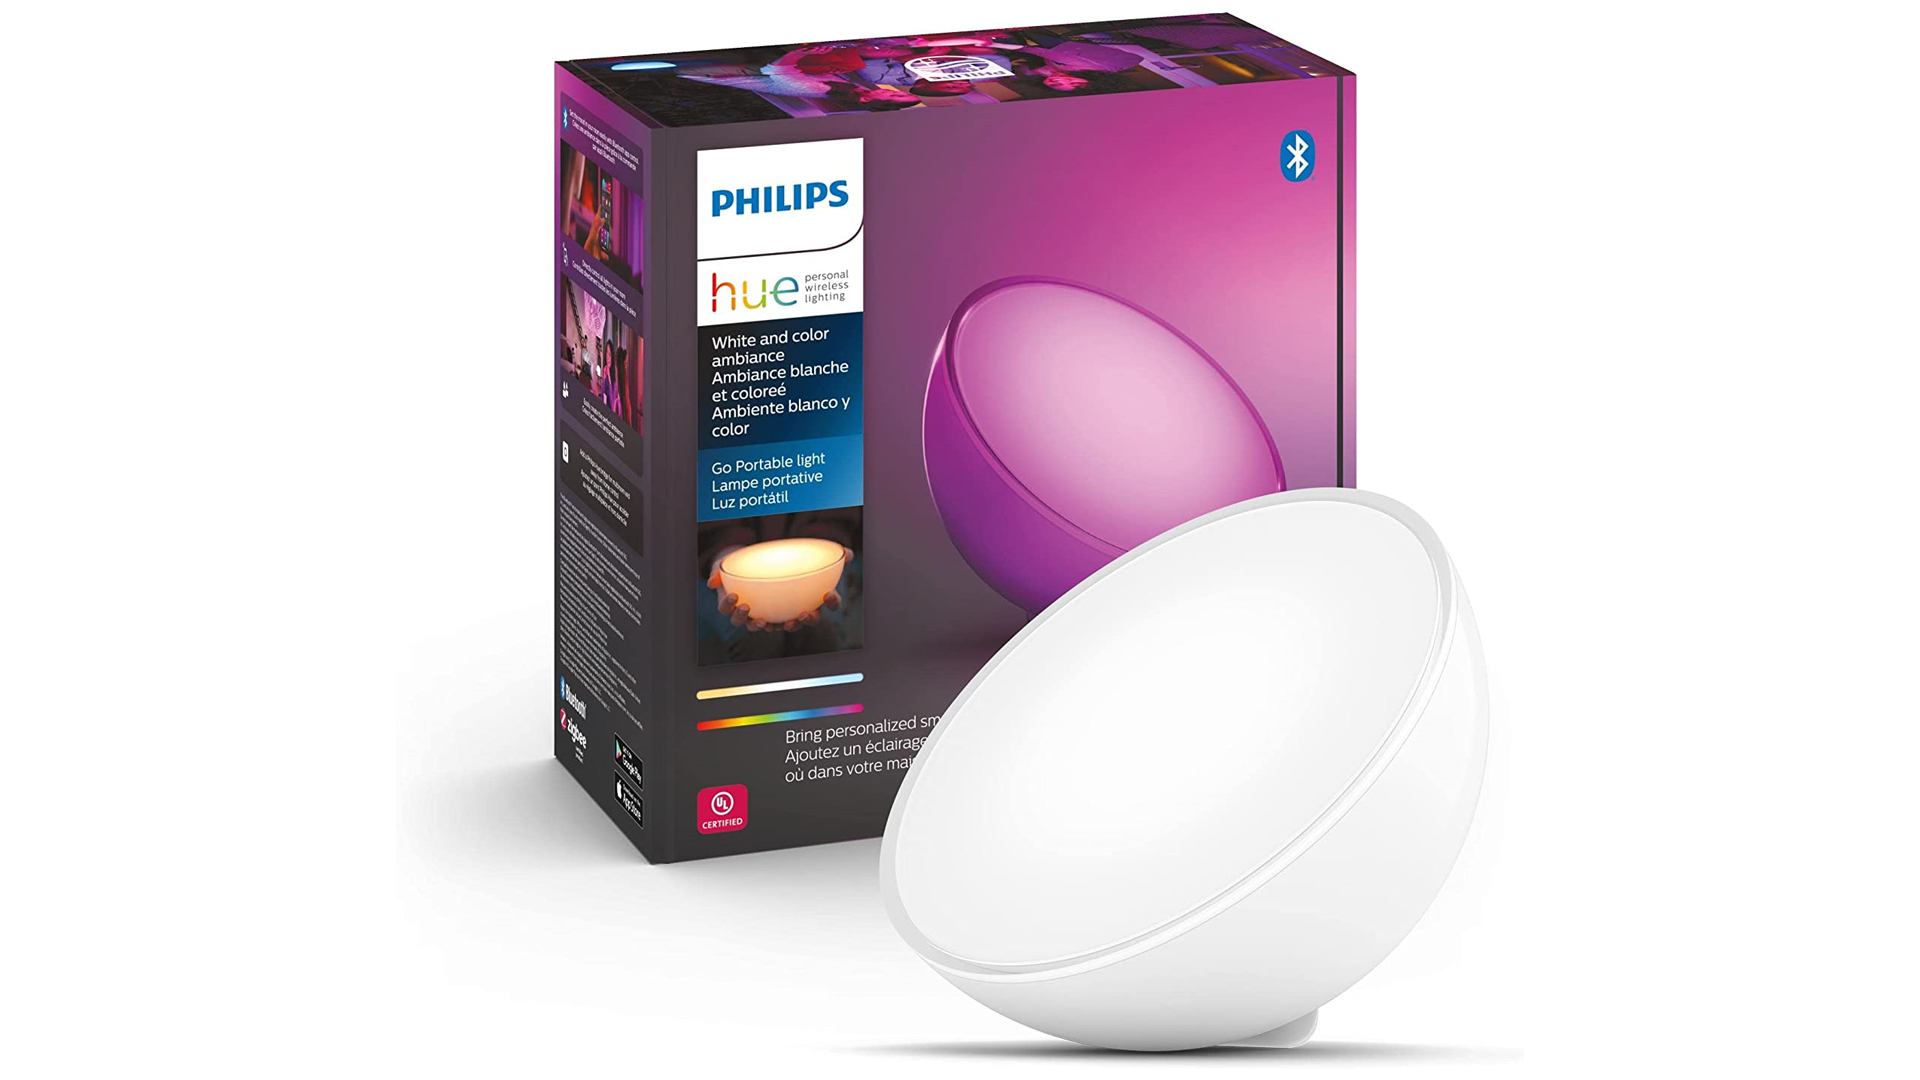 The Philips Hue Go smart lamp